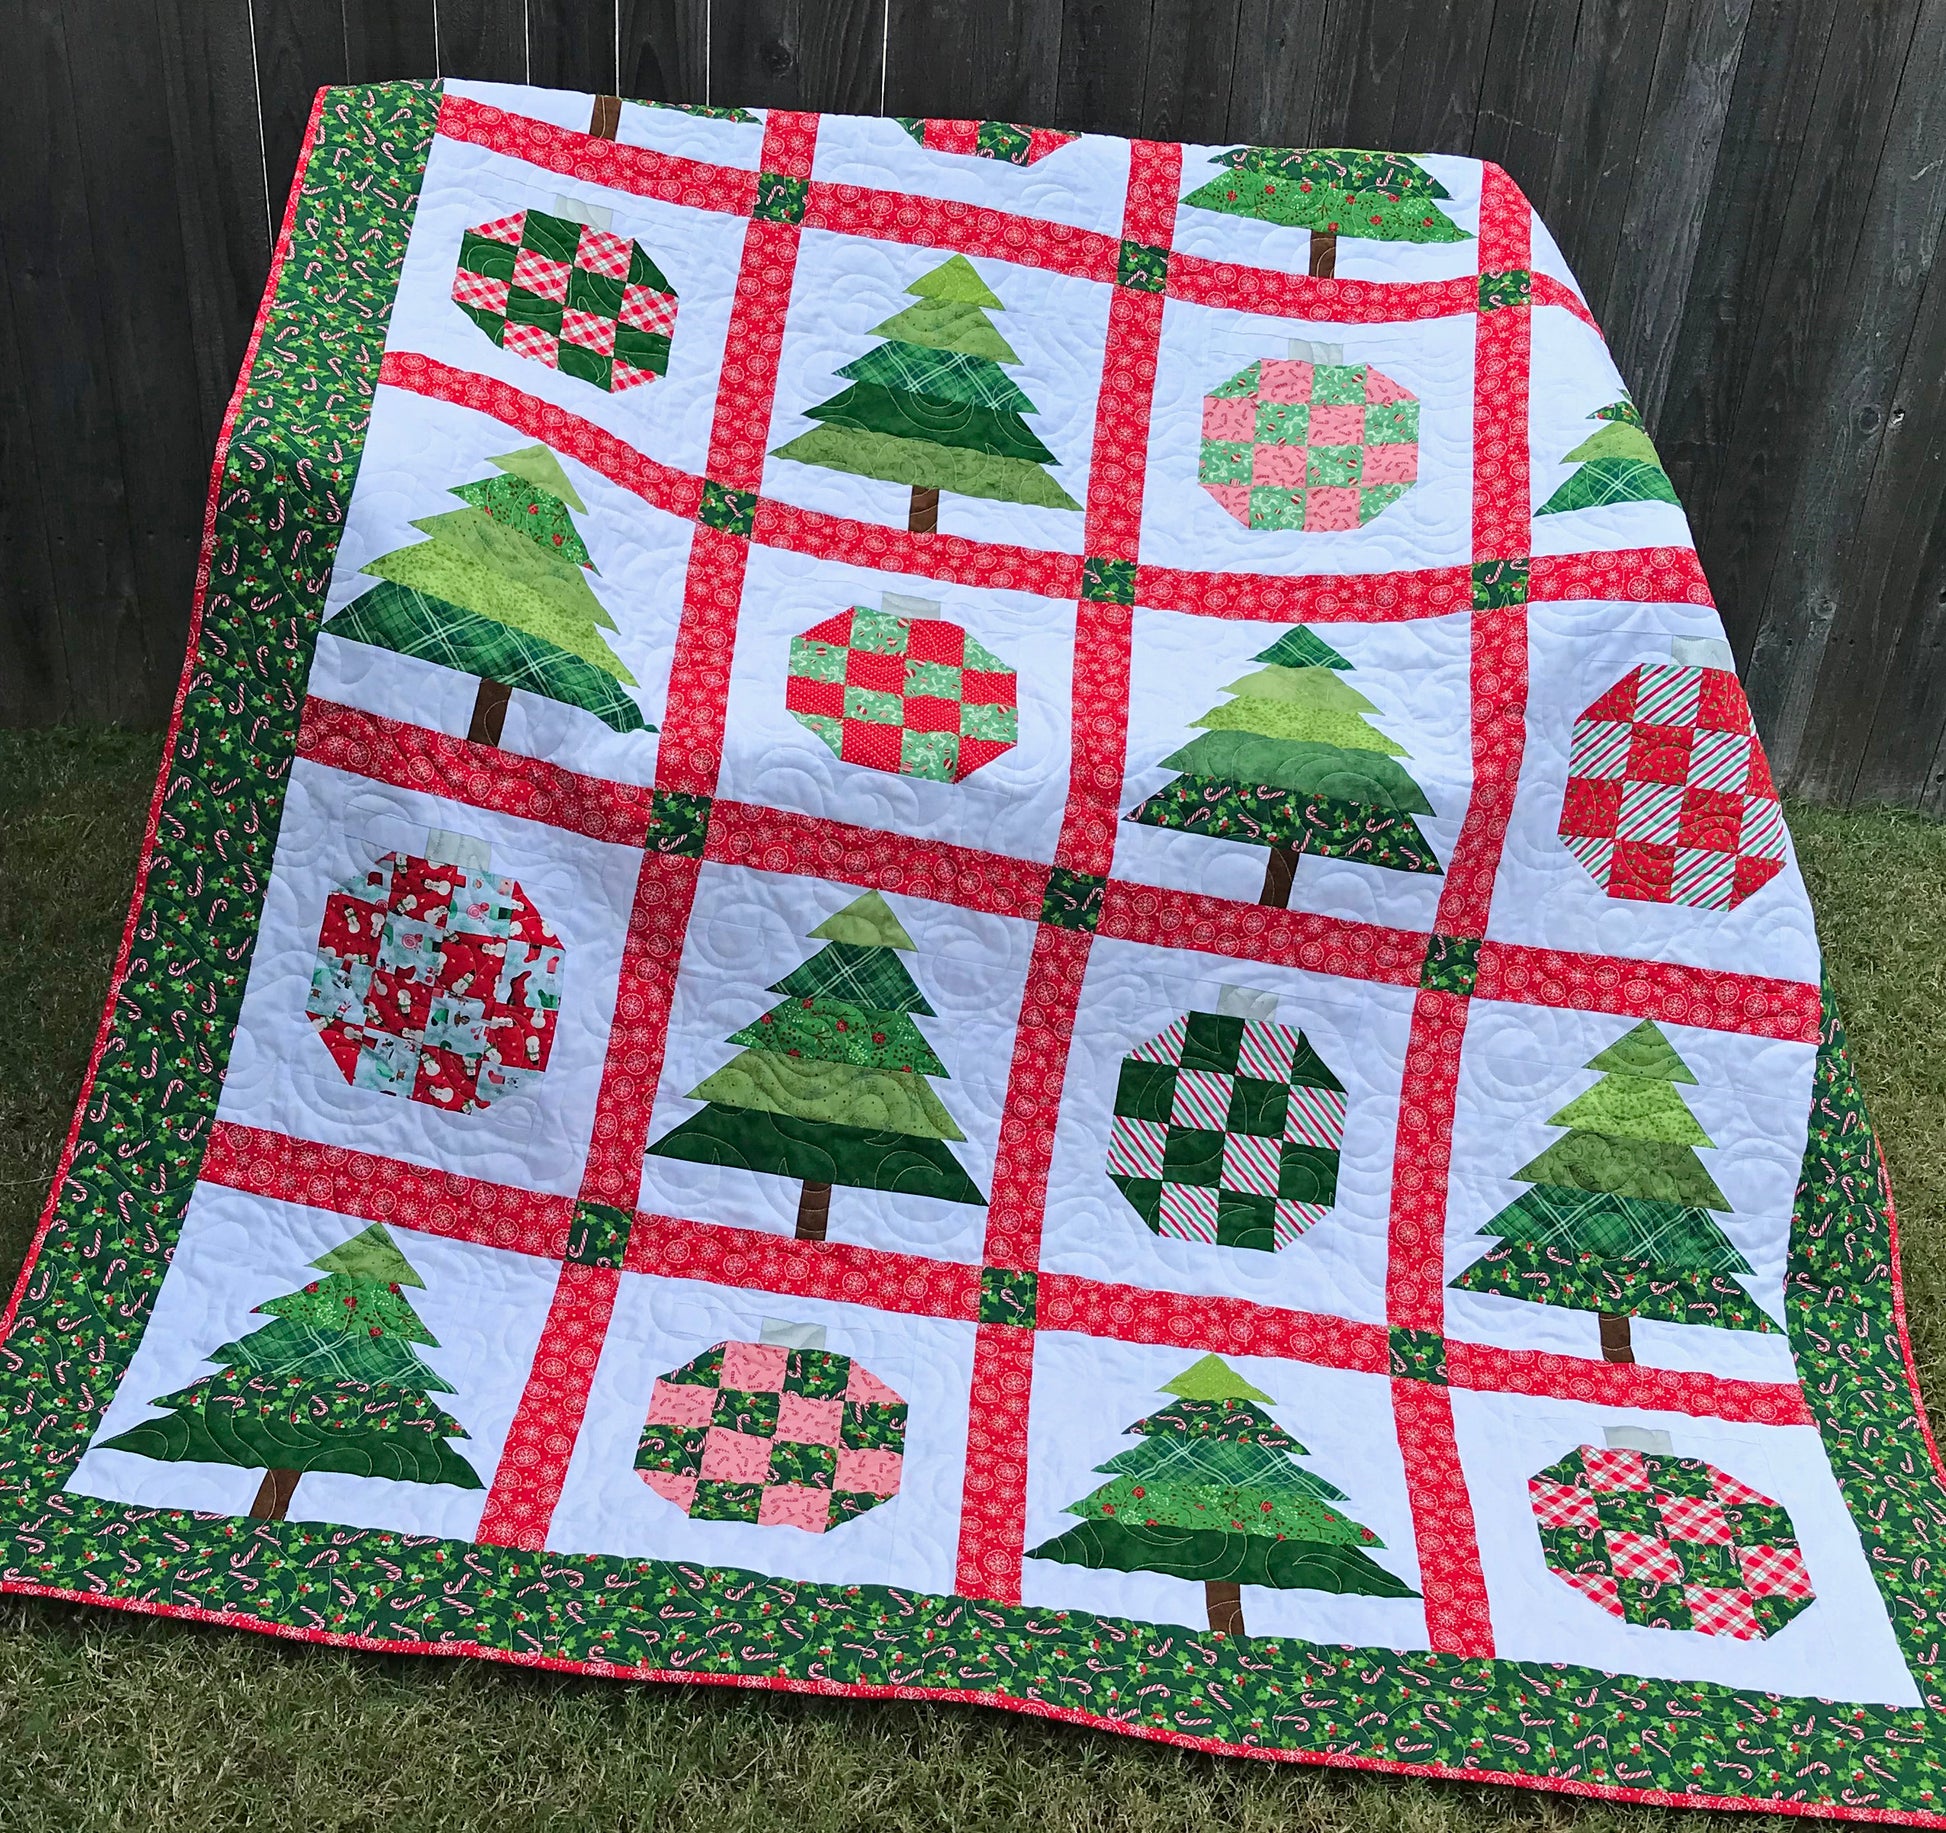 Christmastime quilt pattern with Christmas trees and ornament blocks surrounded by red sashing and a green holly border. Quilt is shown laying on a bench